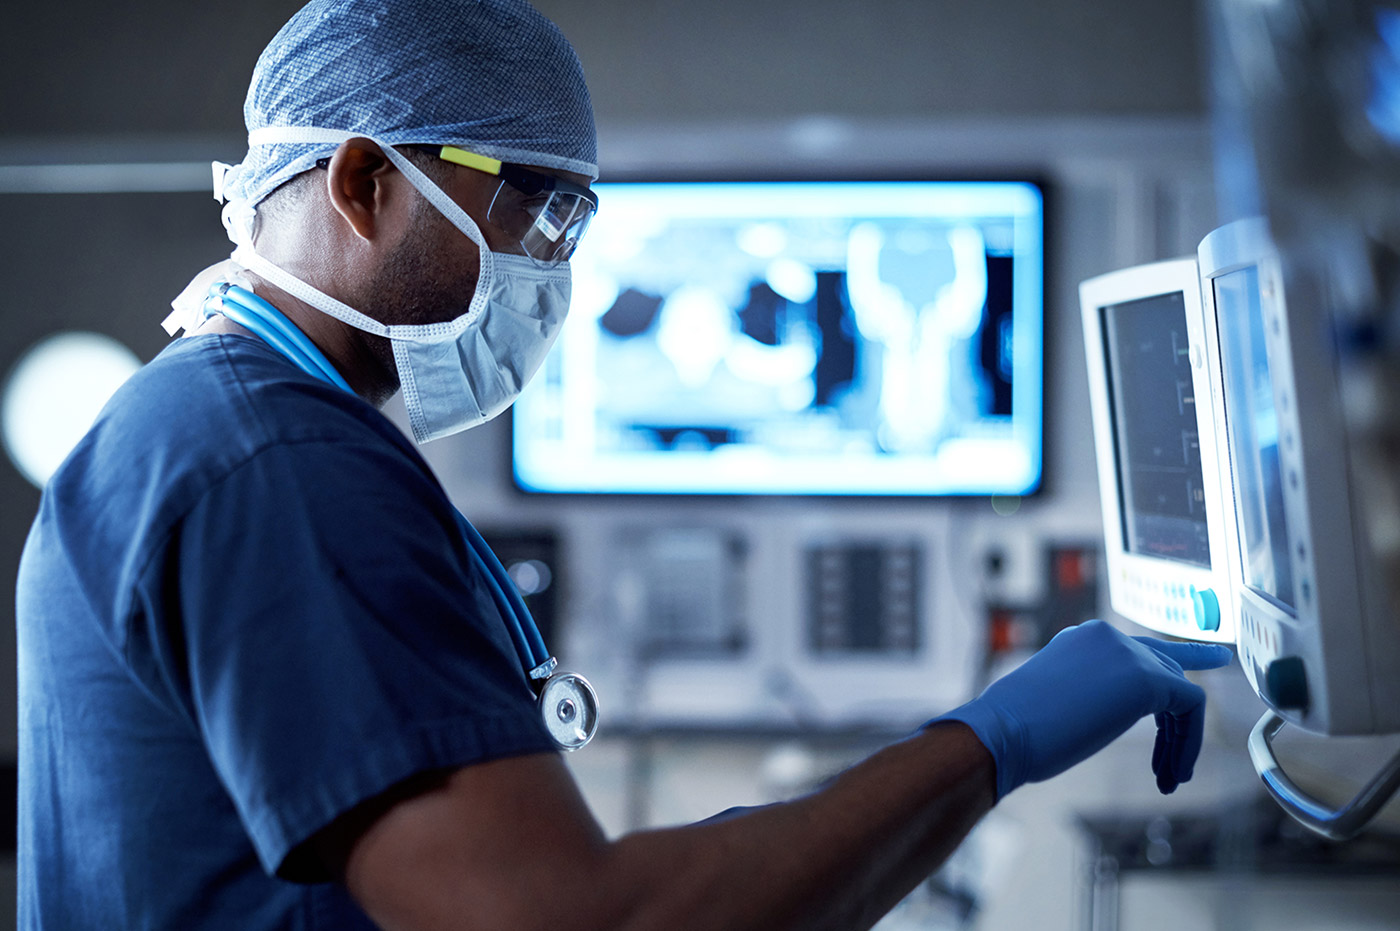 A healthcare working looking at monitors in an operating room.